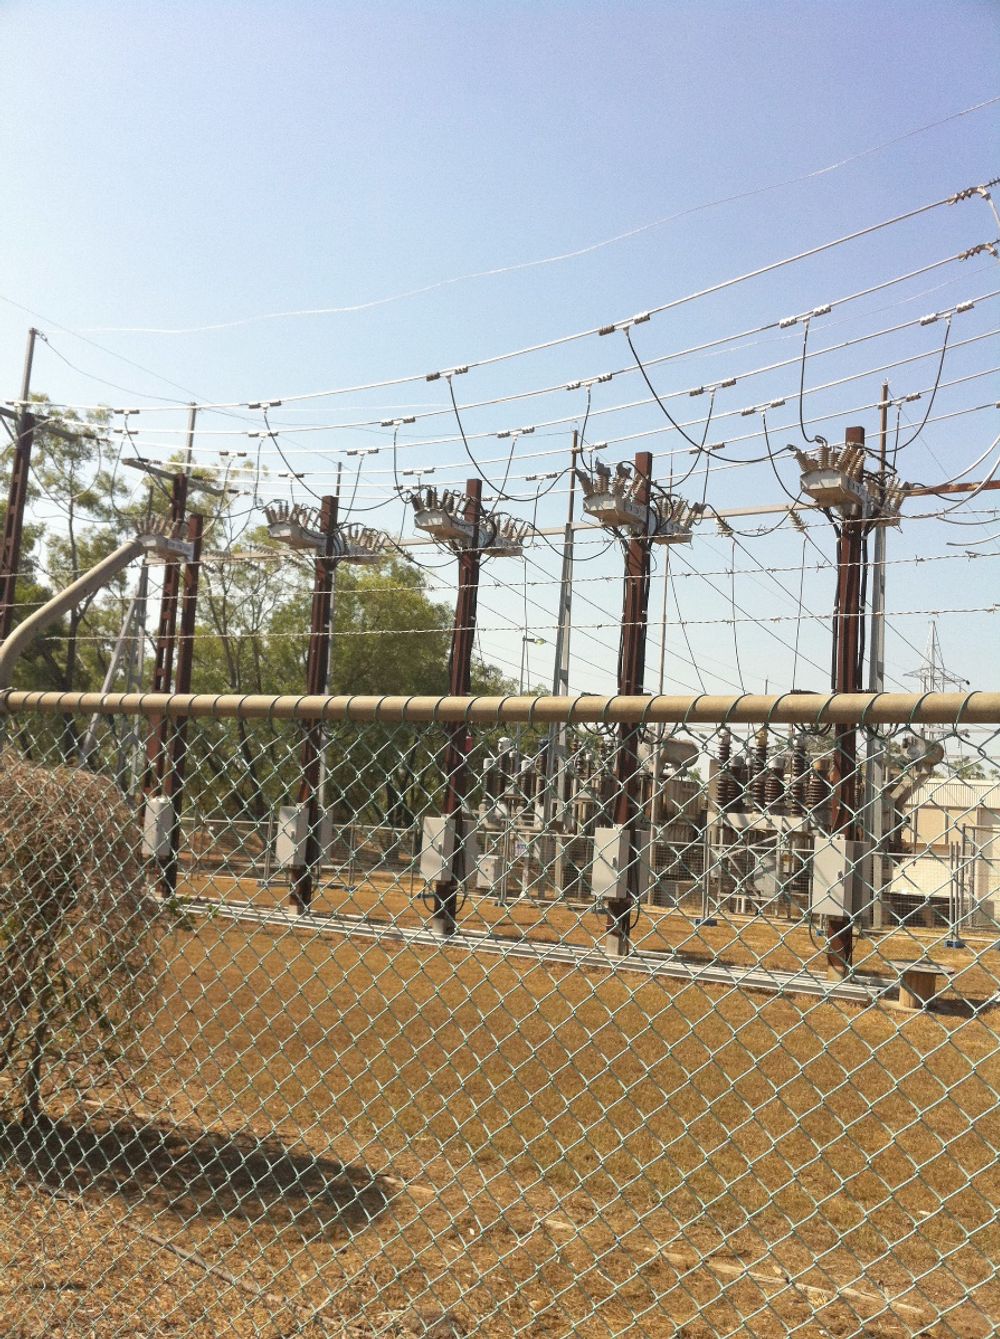 Five NOJA Power installations in substation array behind a chain fence in Northern Territory, Australia 